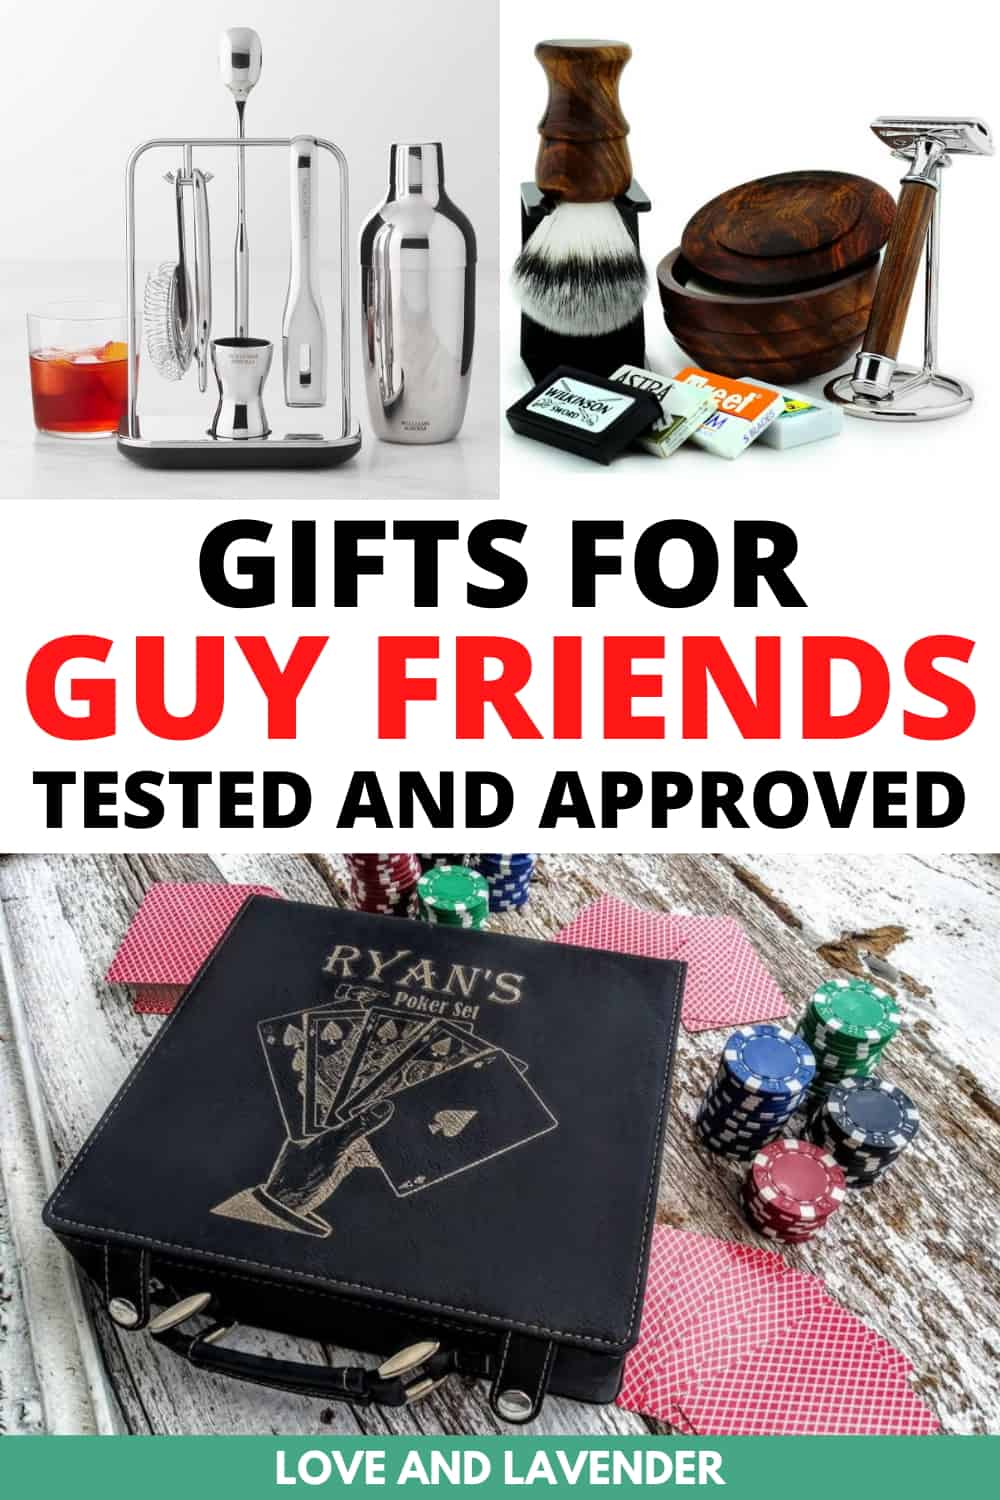 Pinterest pin - Gifts for Guy Friends